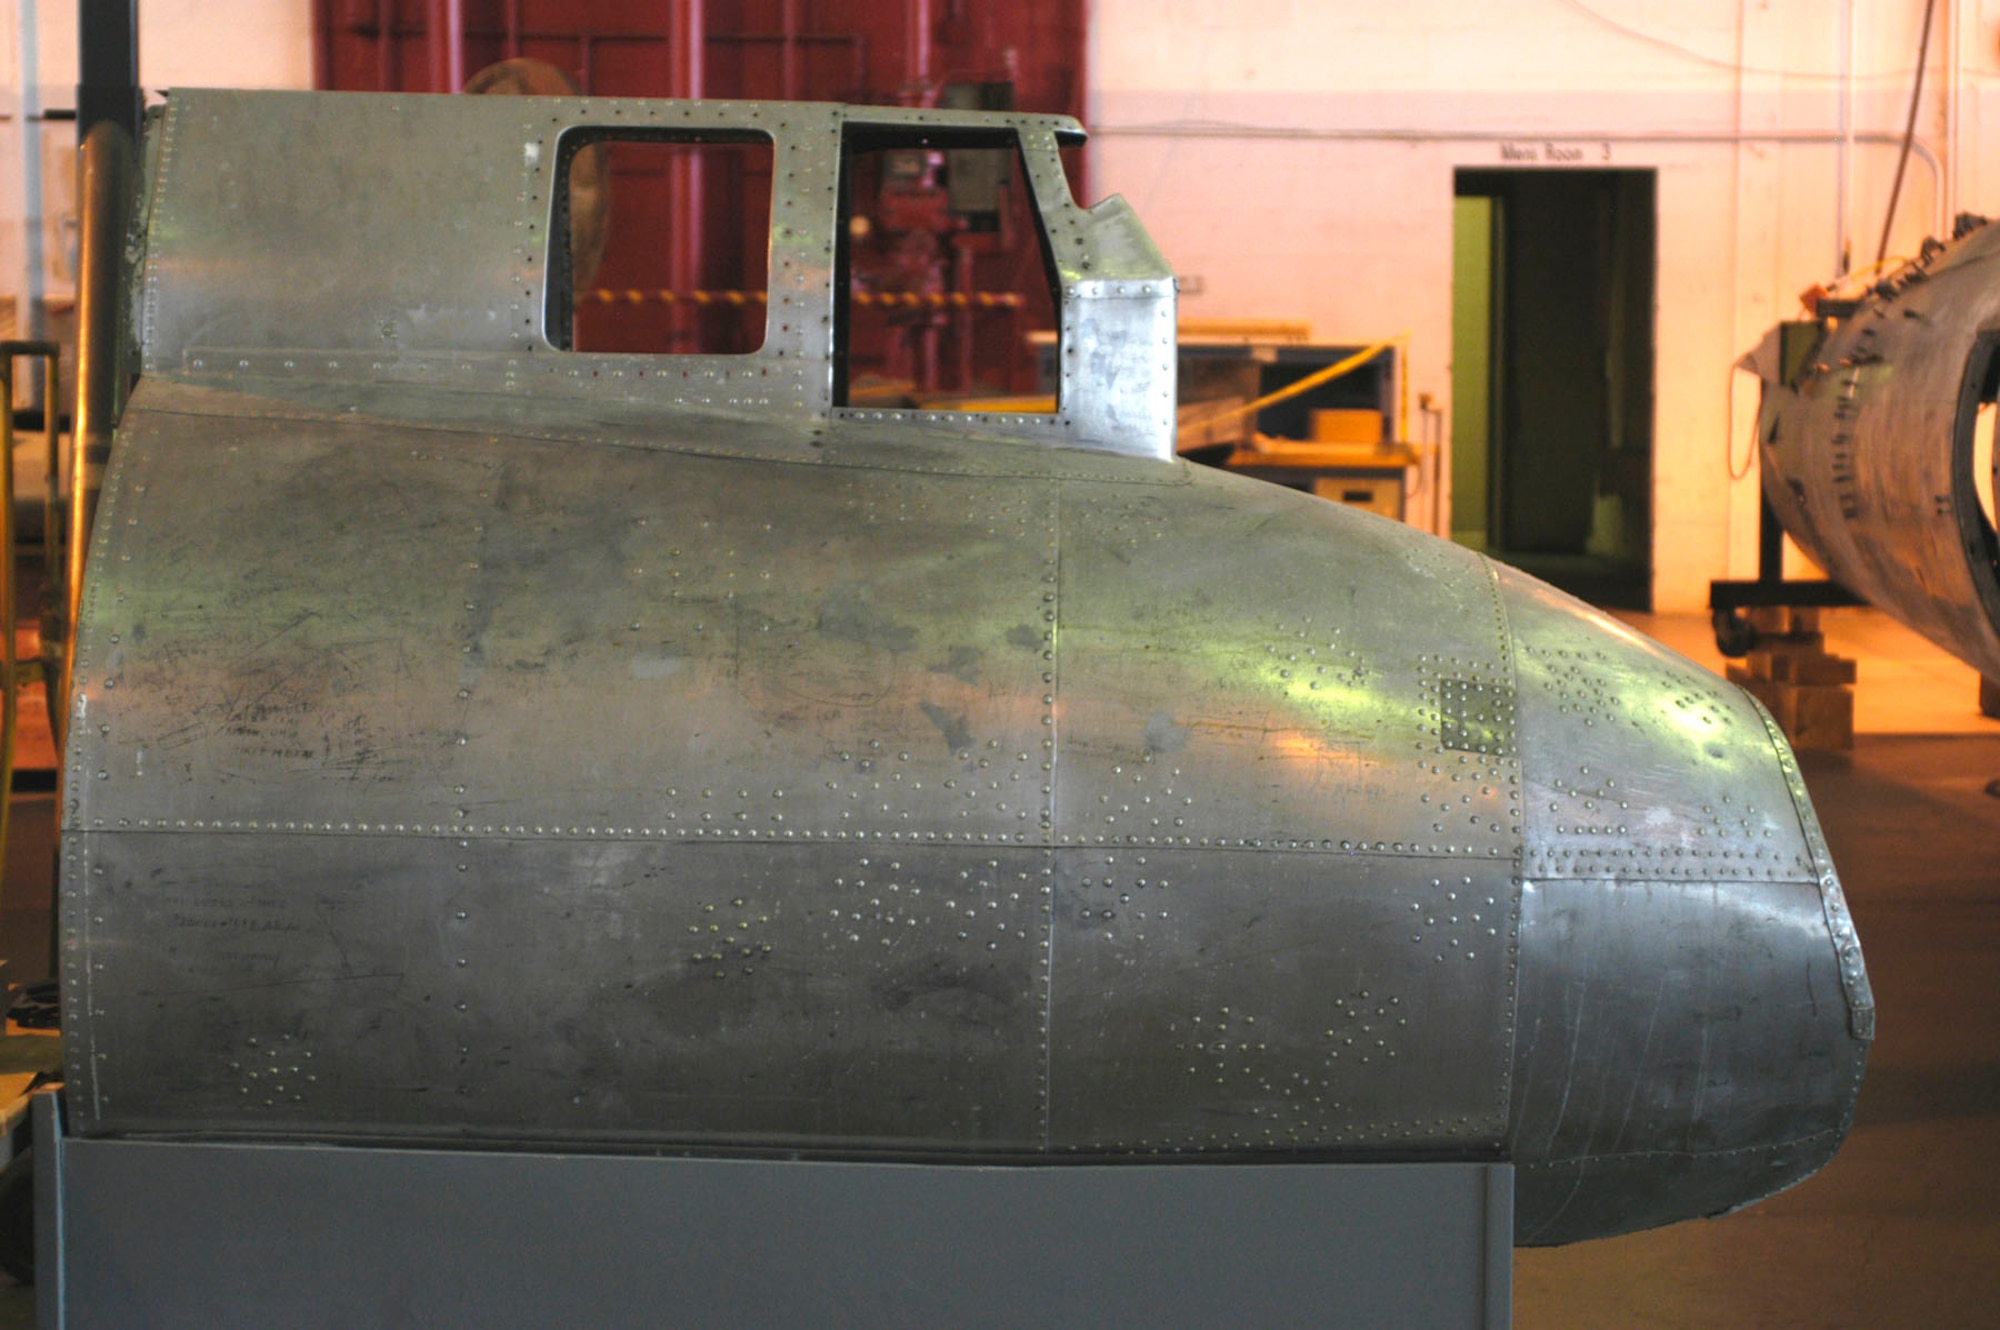 DAYTON, Ohio (10/2007) -- The B-17F "Memphis Belle" in restoration at the National Museum of the U.S. Air Force. (U.S. Air Force photo)